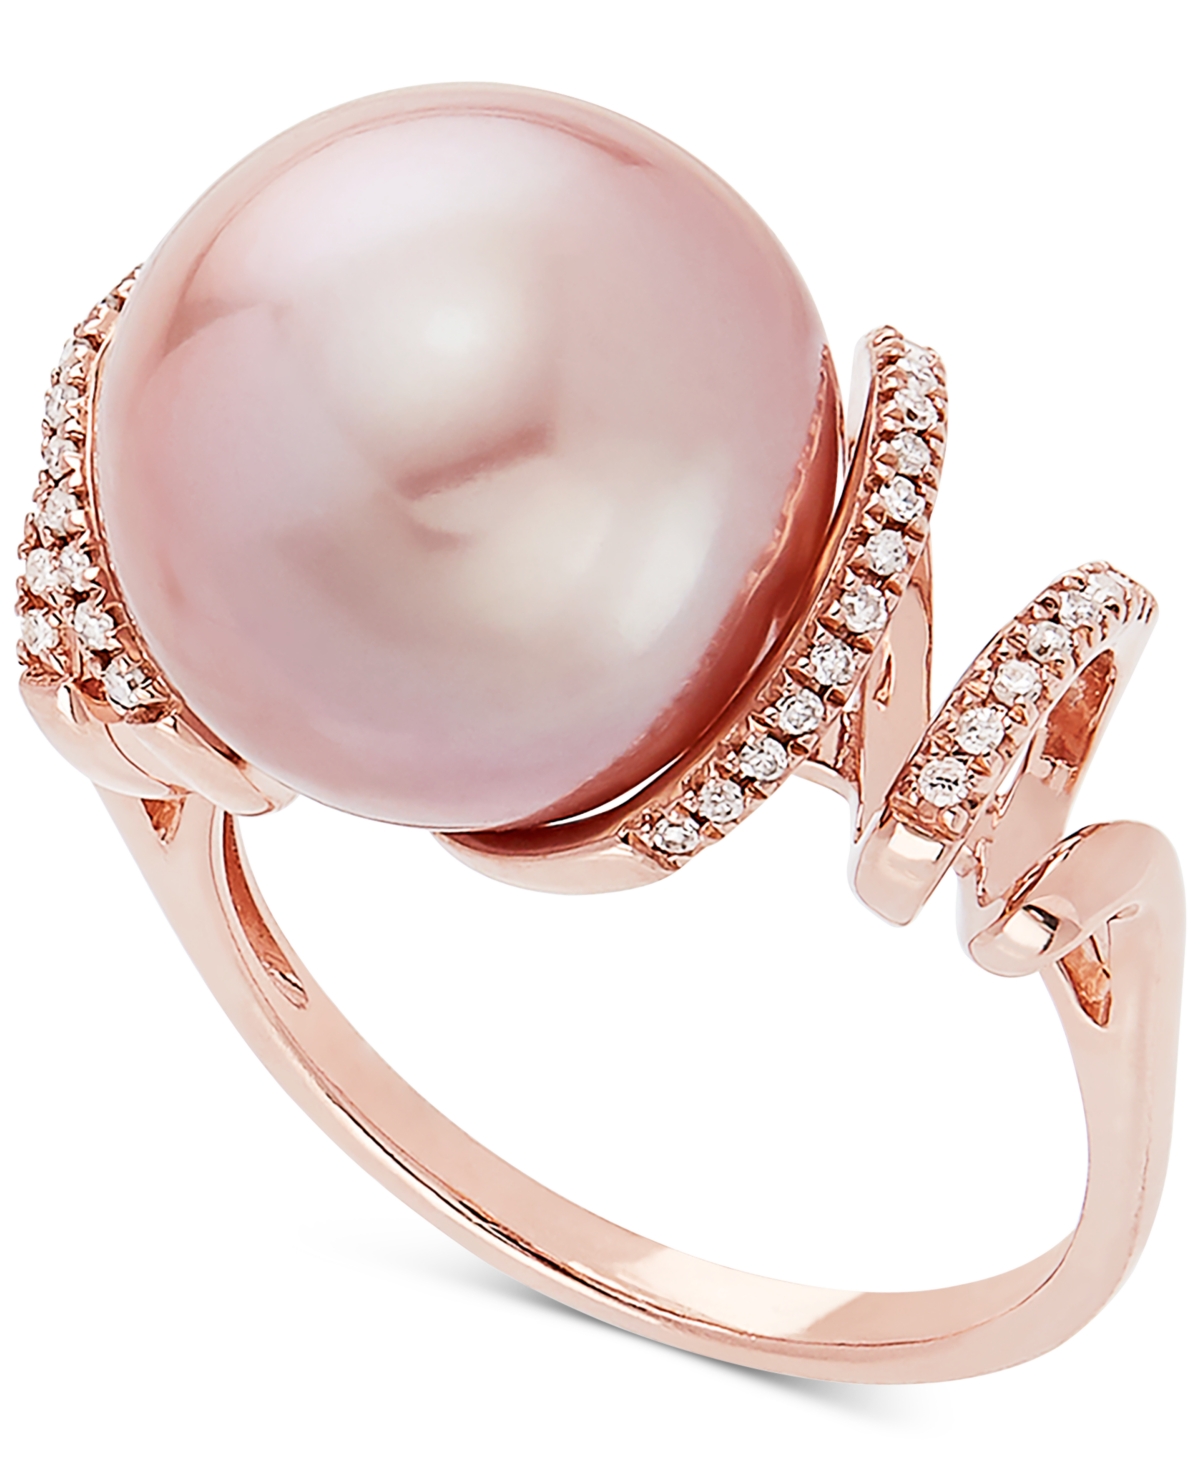 Cultured Pink Ming Pearl (13mm) & Diamond (1/8 ct. t.w.) Ring in 14k Rose Gold - Pink